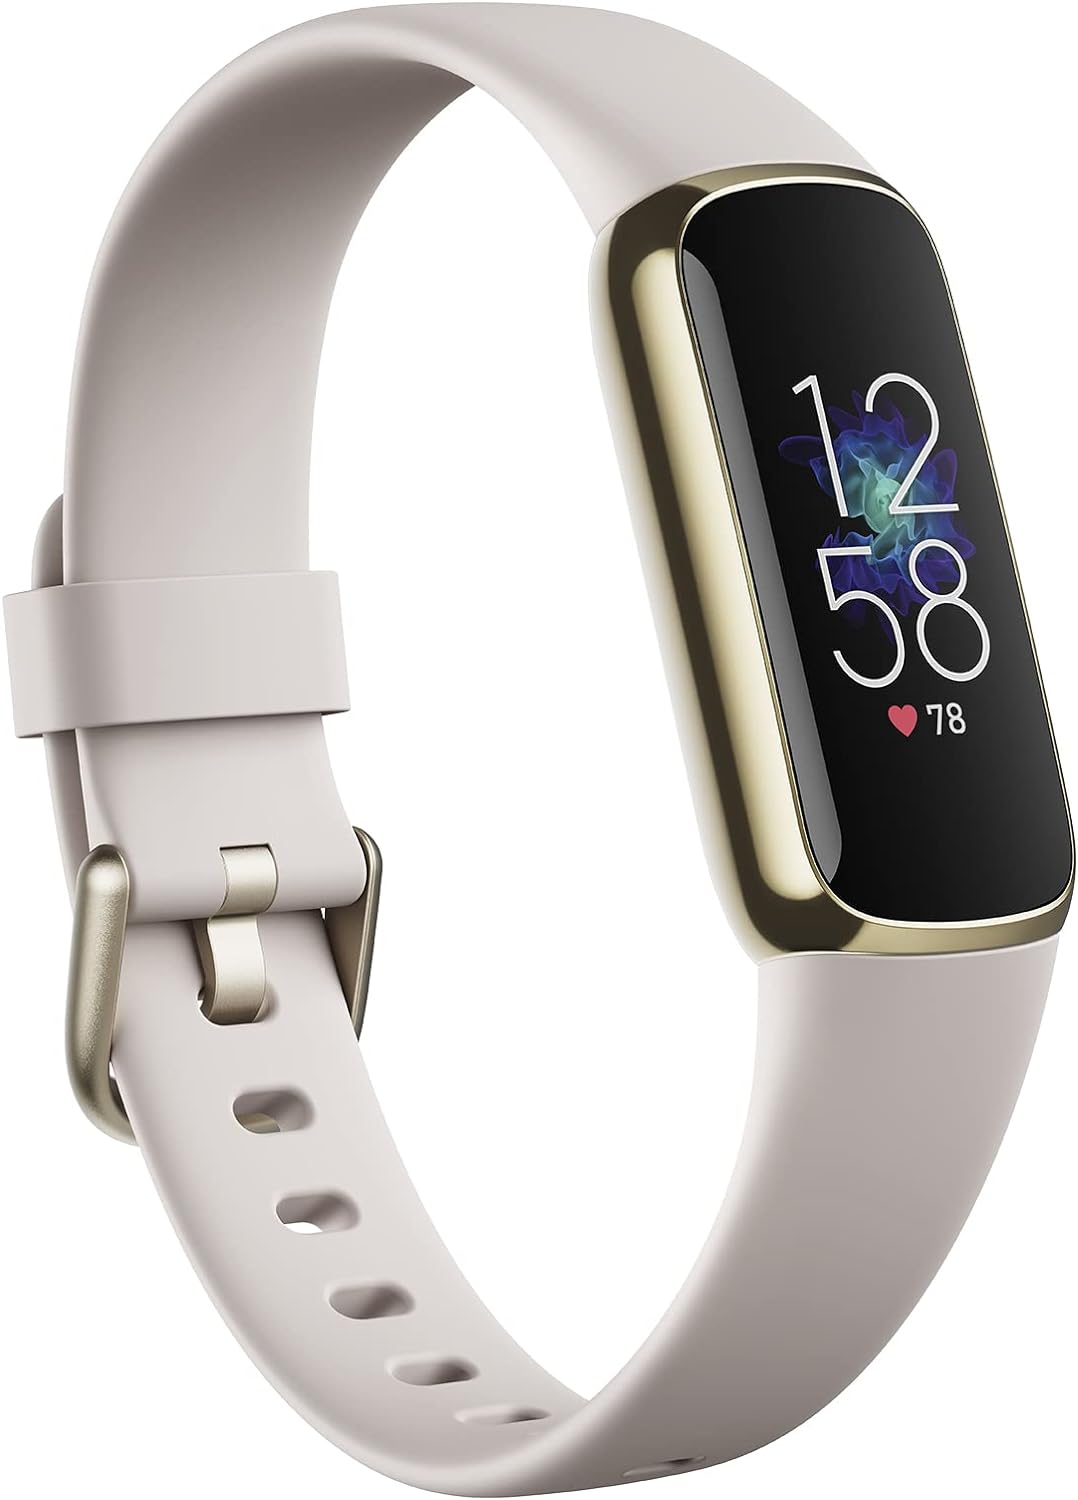 Fitbit Luxe Gift Pack Bundle - Lunar White & Soft Gold - Refurbished Good